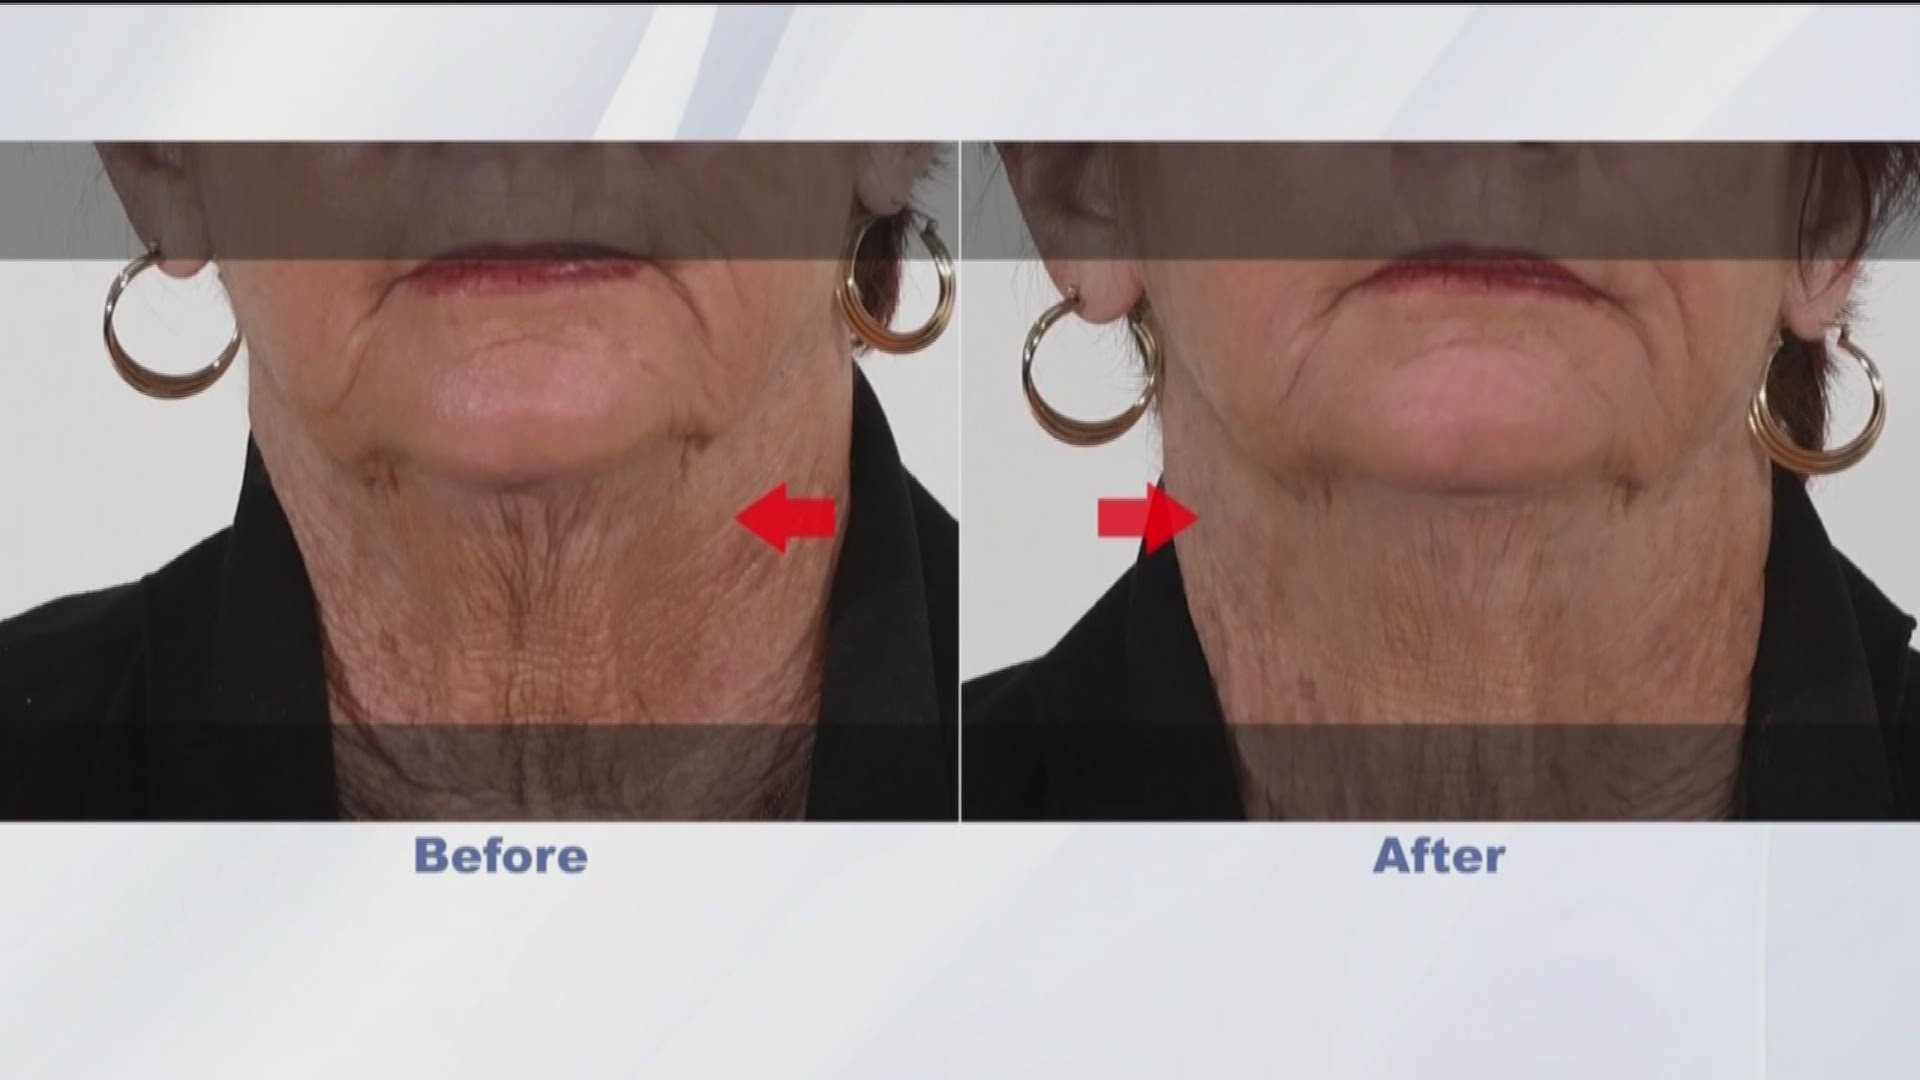 Plexaderm Erases Signs of Aging. Go to plexaderm.com for more information. 